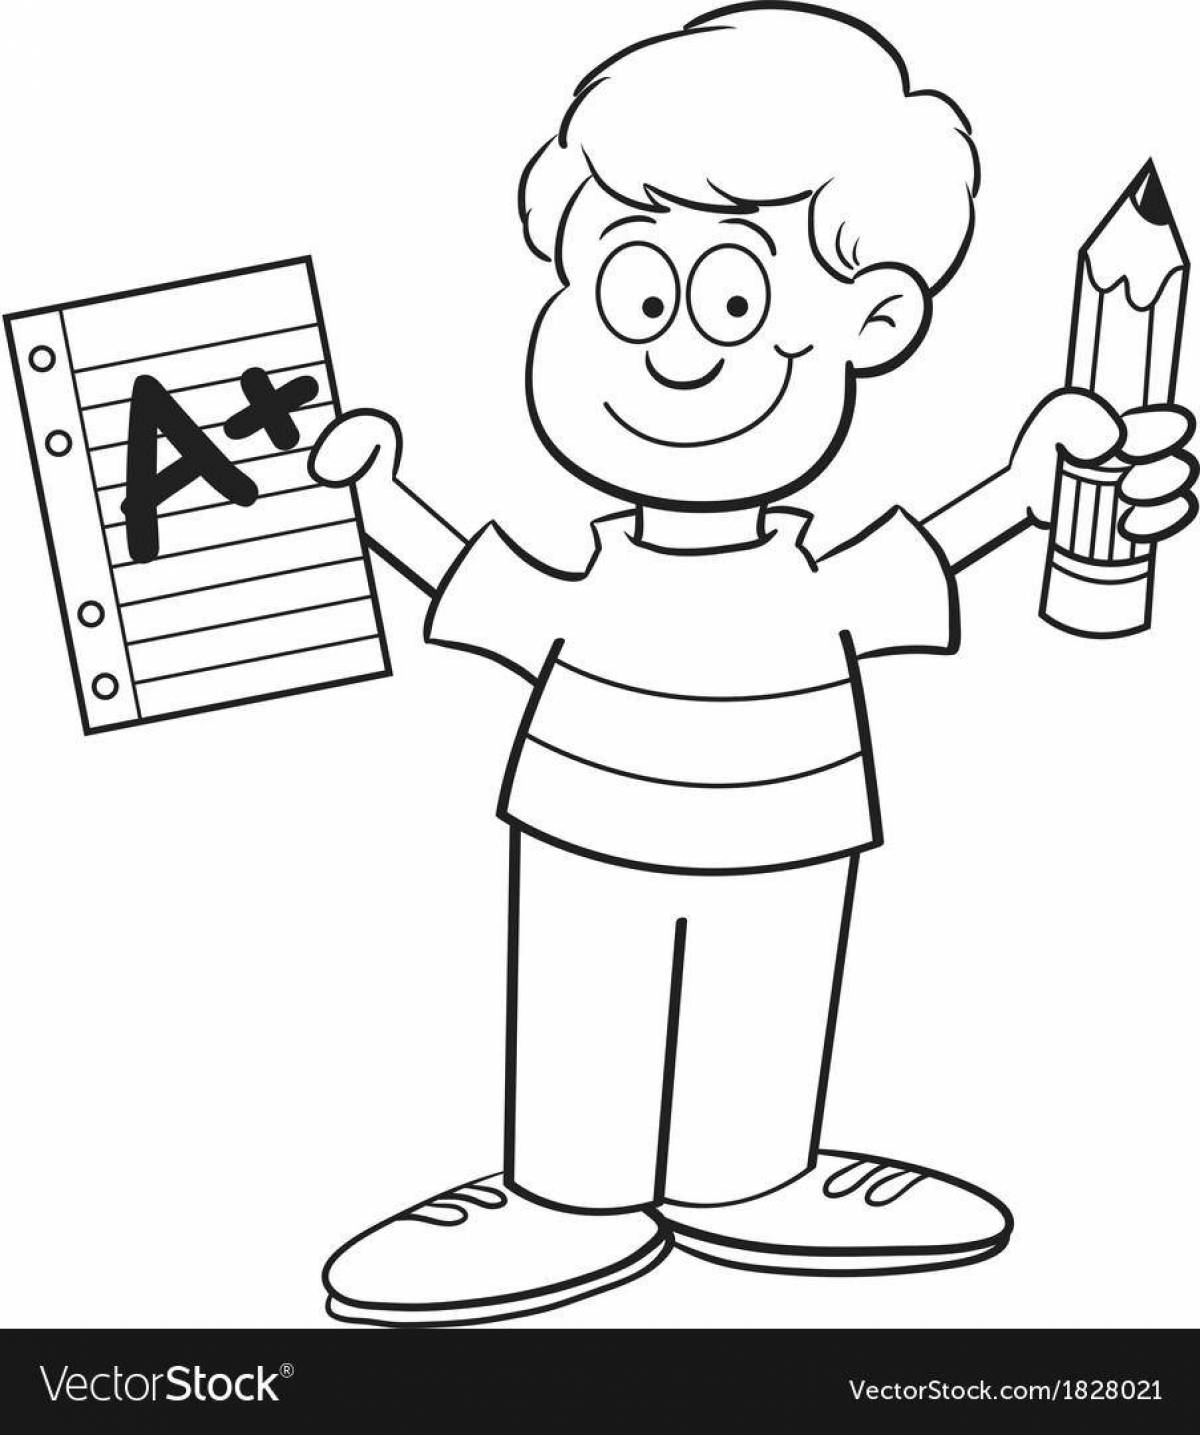 A fun coloring book on financial literacy for elementary school students